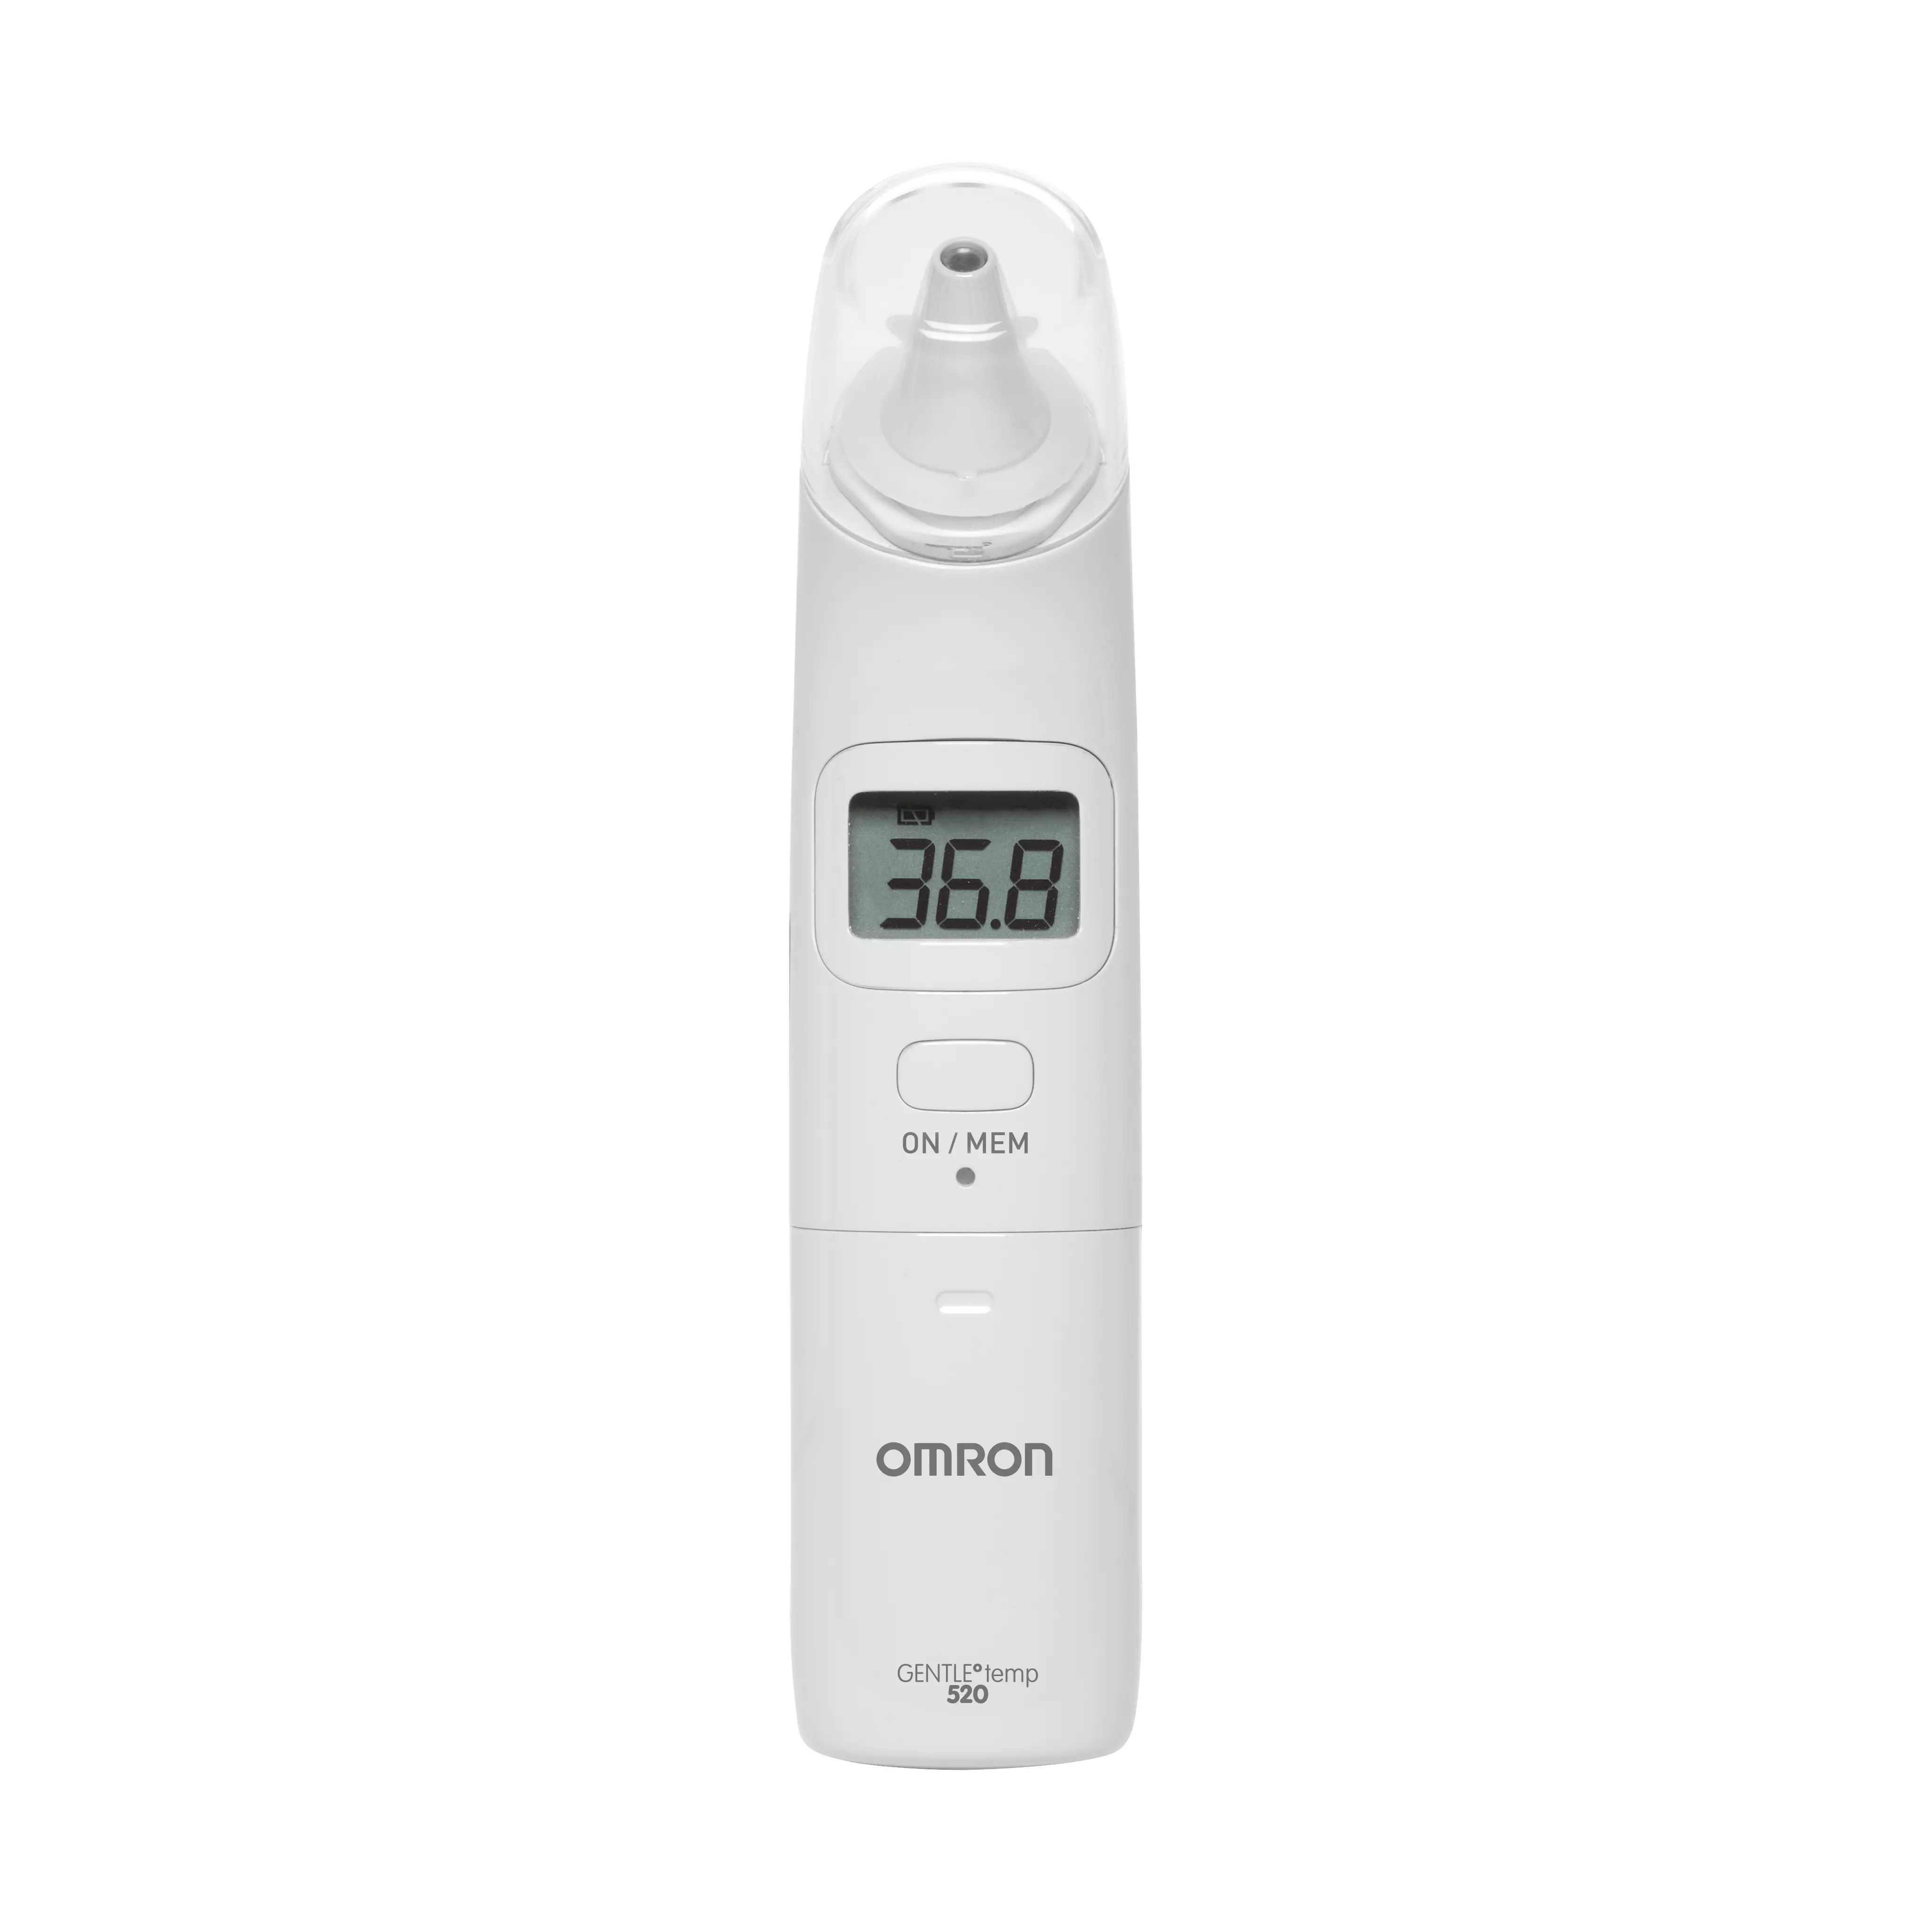 OMRON Gentle Temp 520 infrared ear thermometer